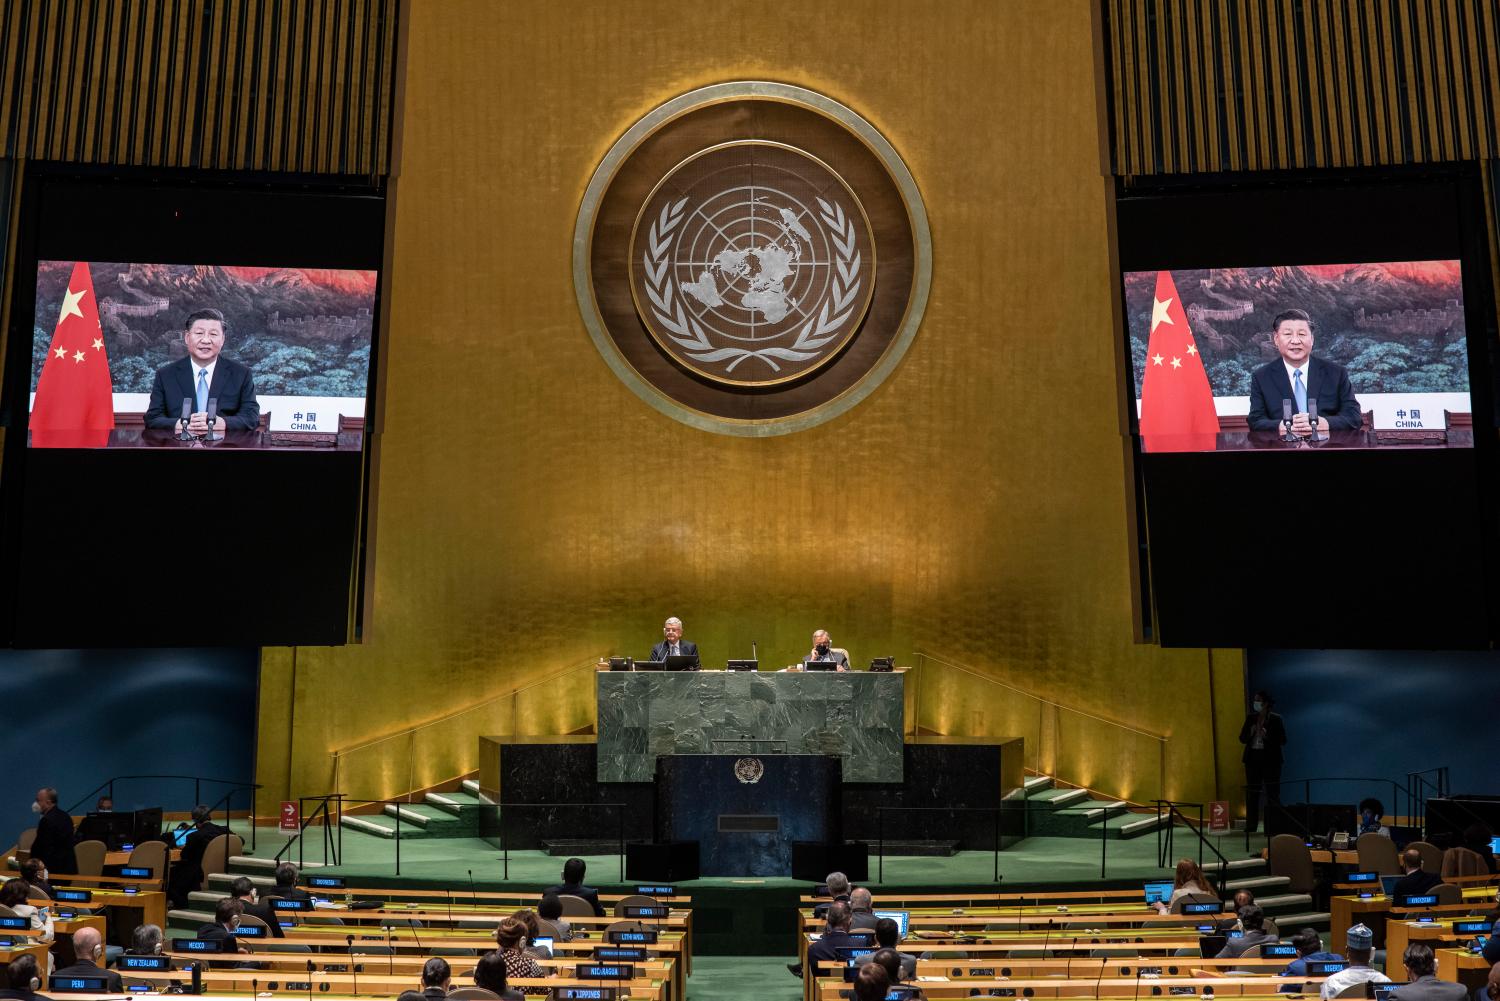 Chinese President Xi Jinping (on screens), addresses the general debate of the General Assembly’s 75th session.